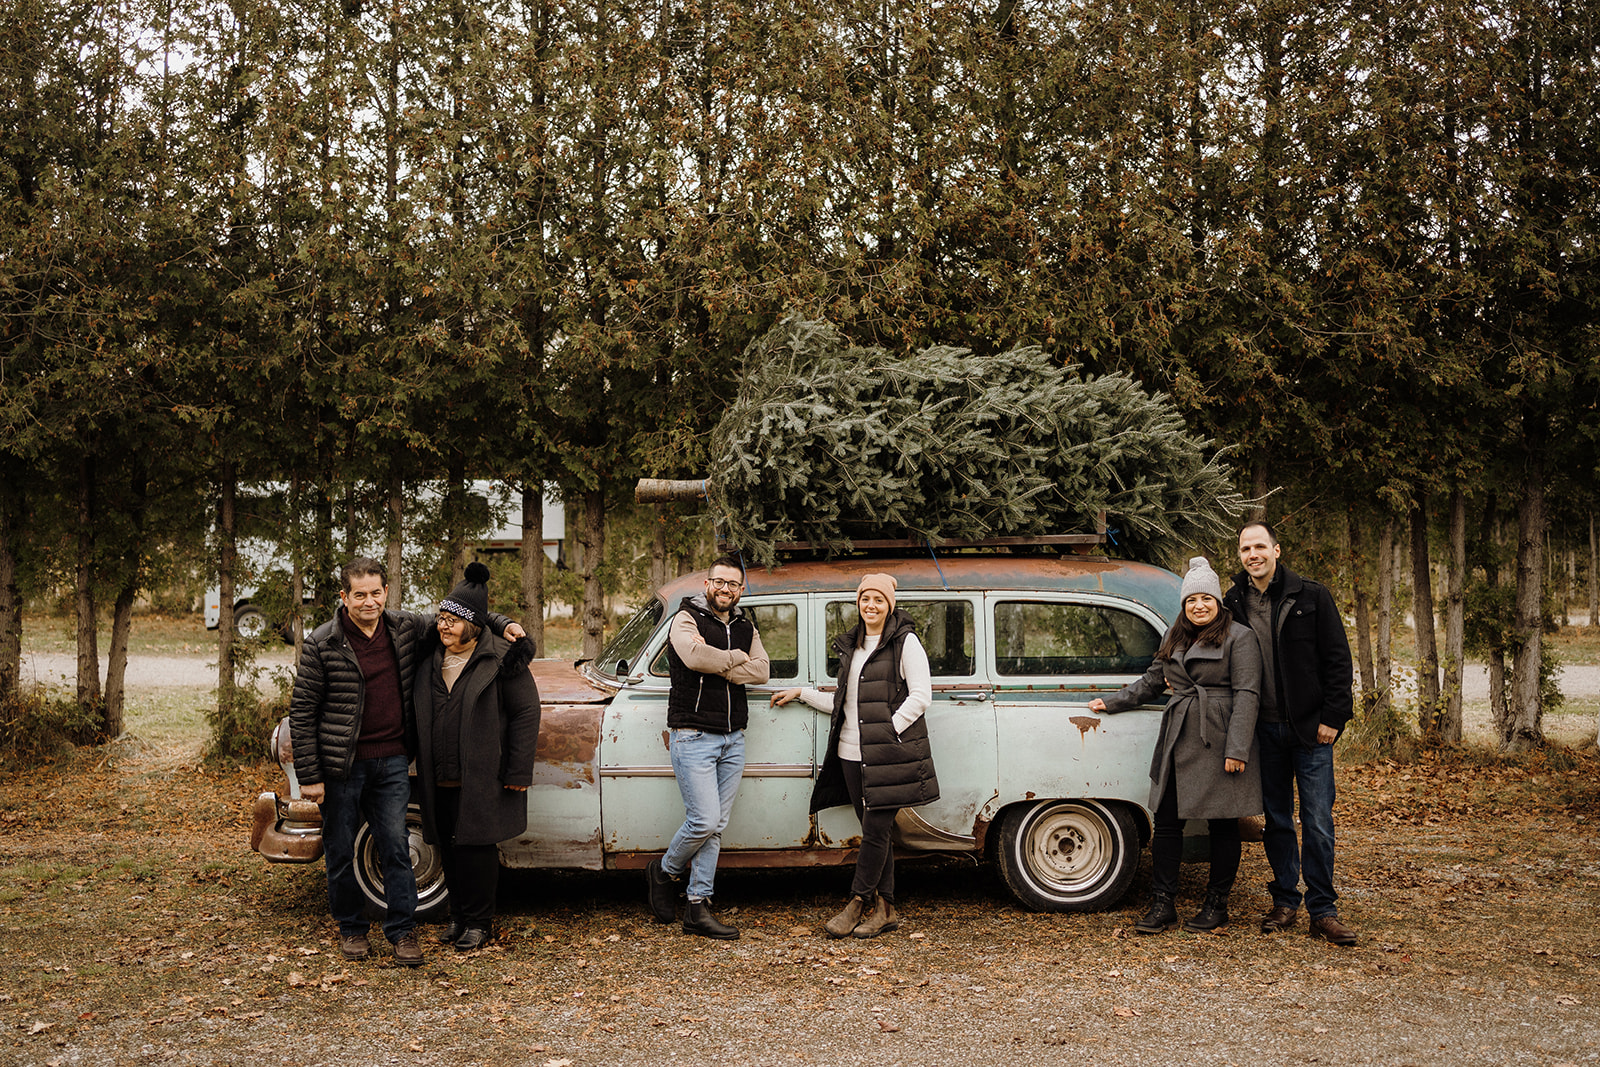 A family of six standing along a vintage looking car.